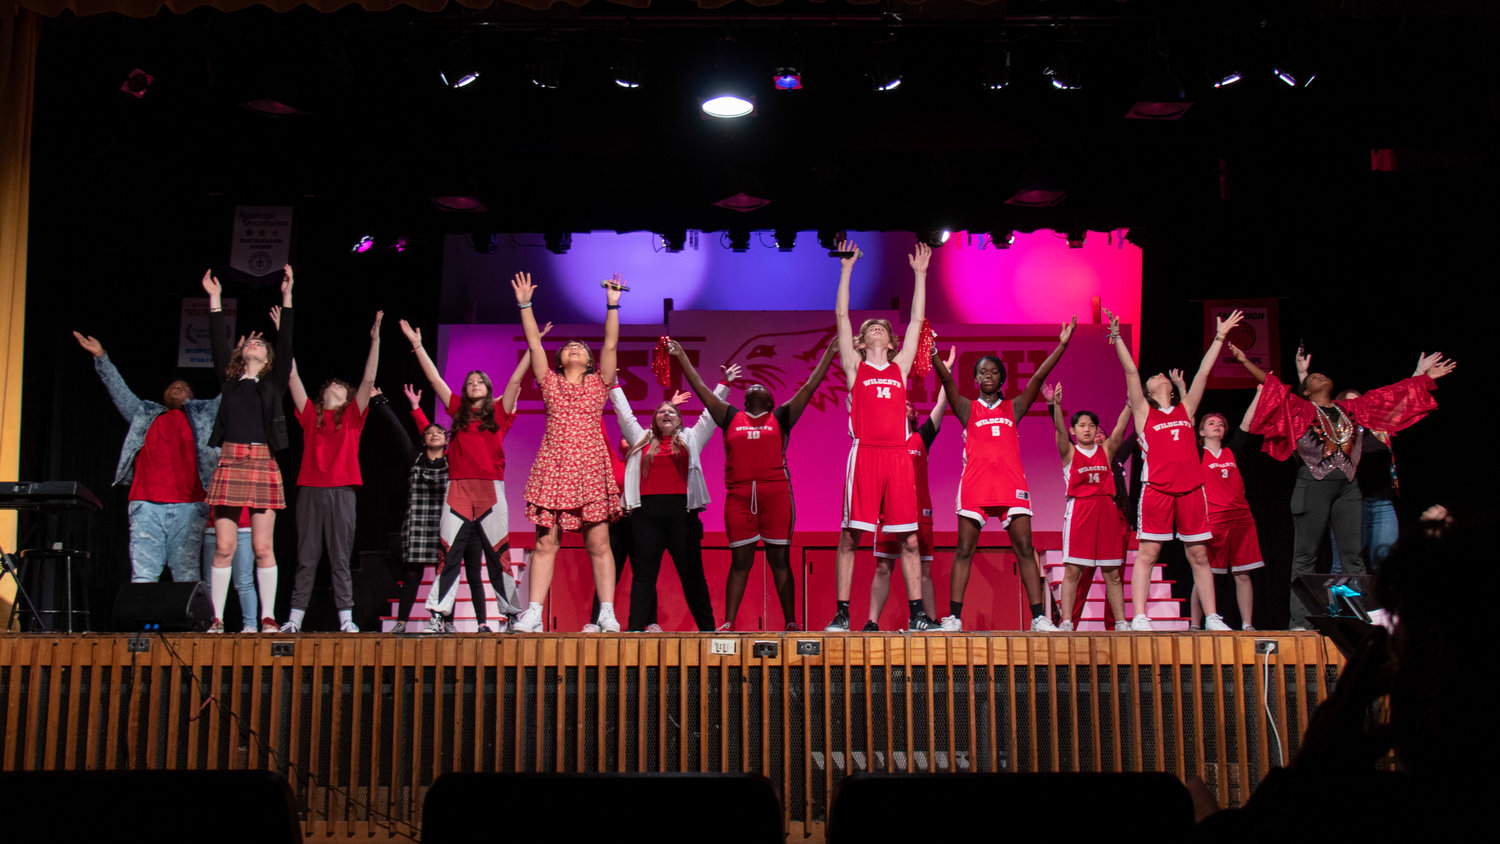 The Como Theater Department’s production of Disney’s “High School Musical” was staged on March 18 and 19 in the Como auditorium .(Photo by Como senior Soren Sackreiter)